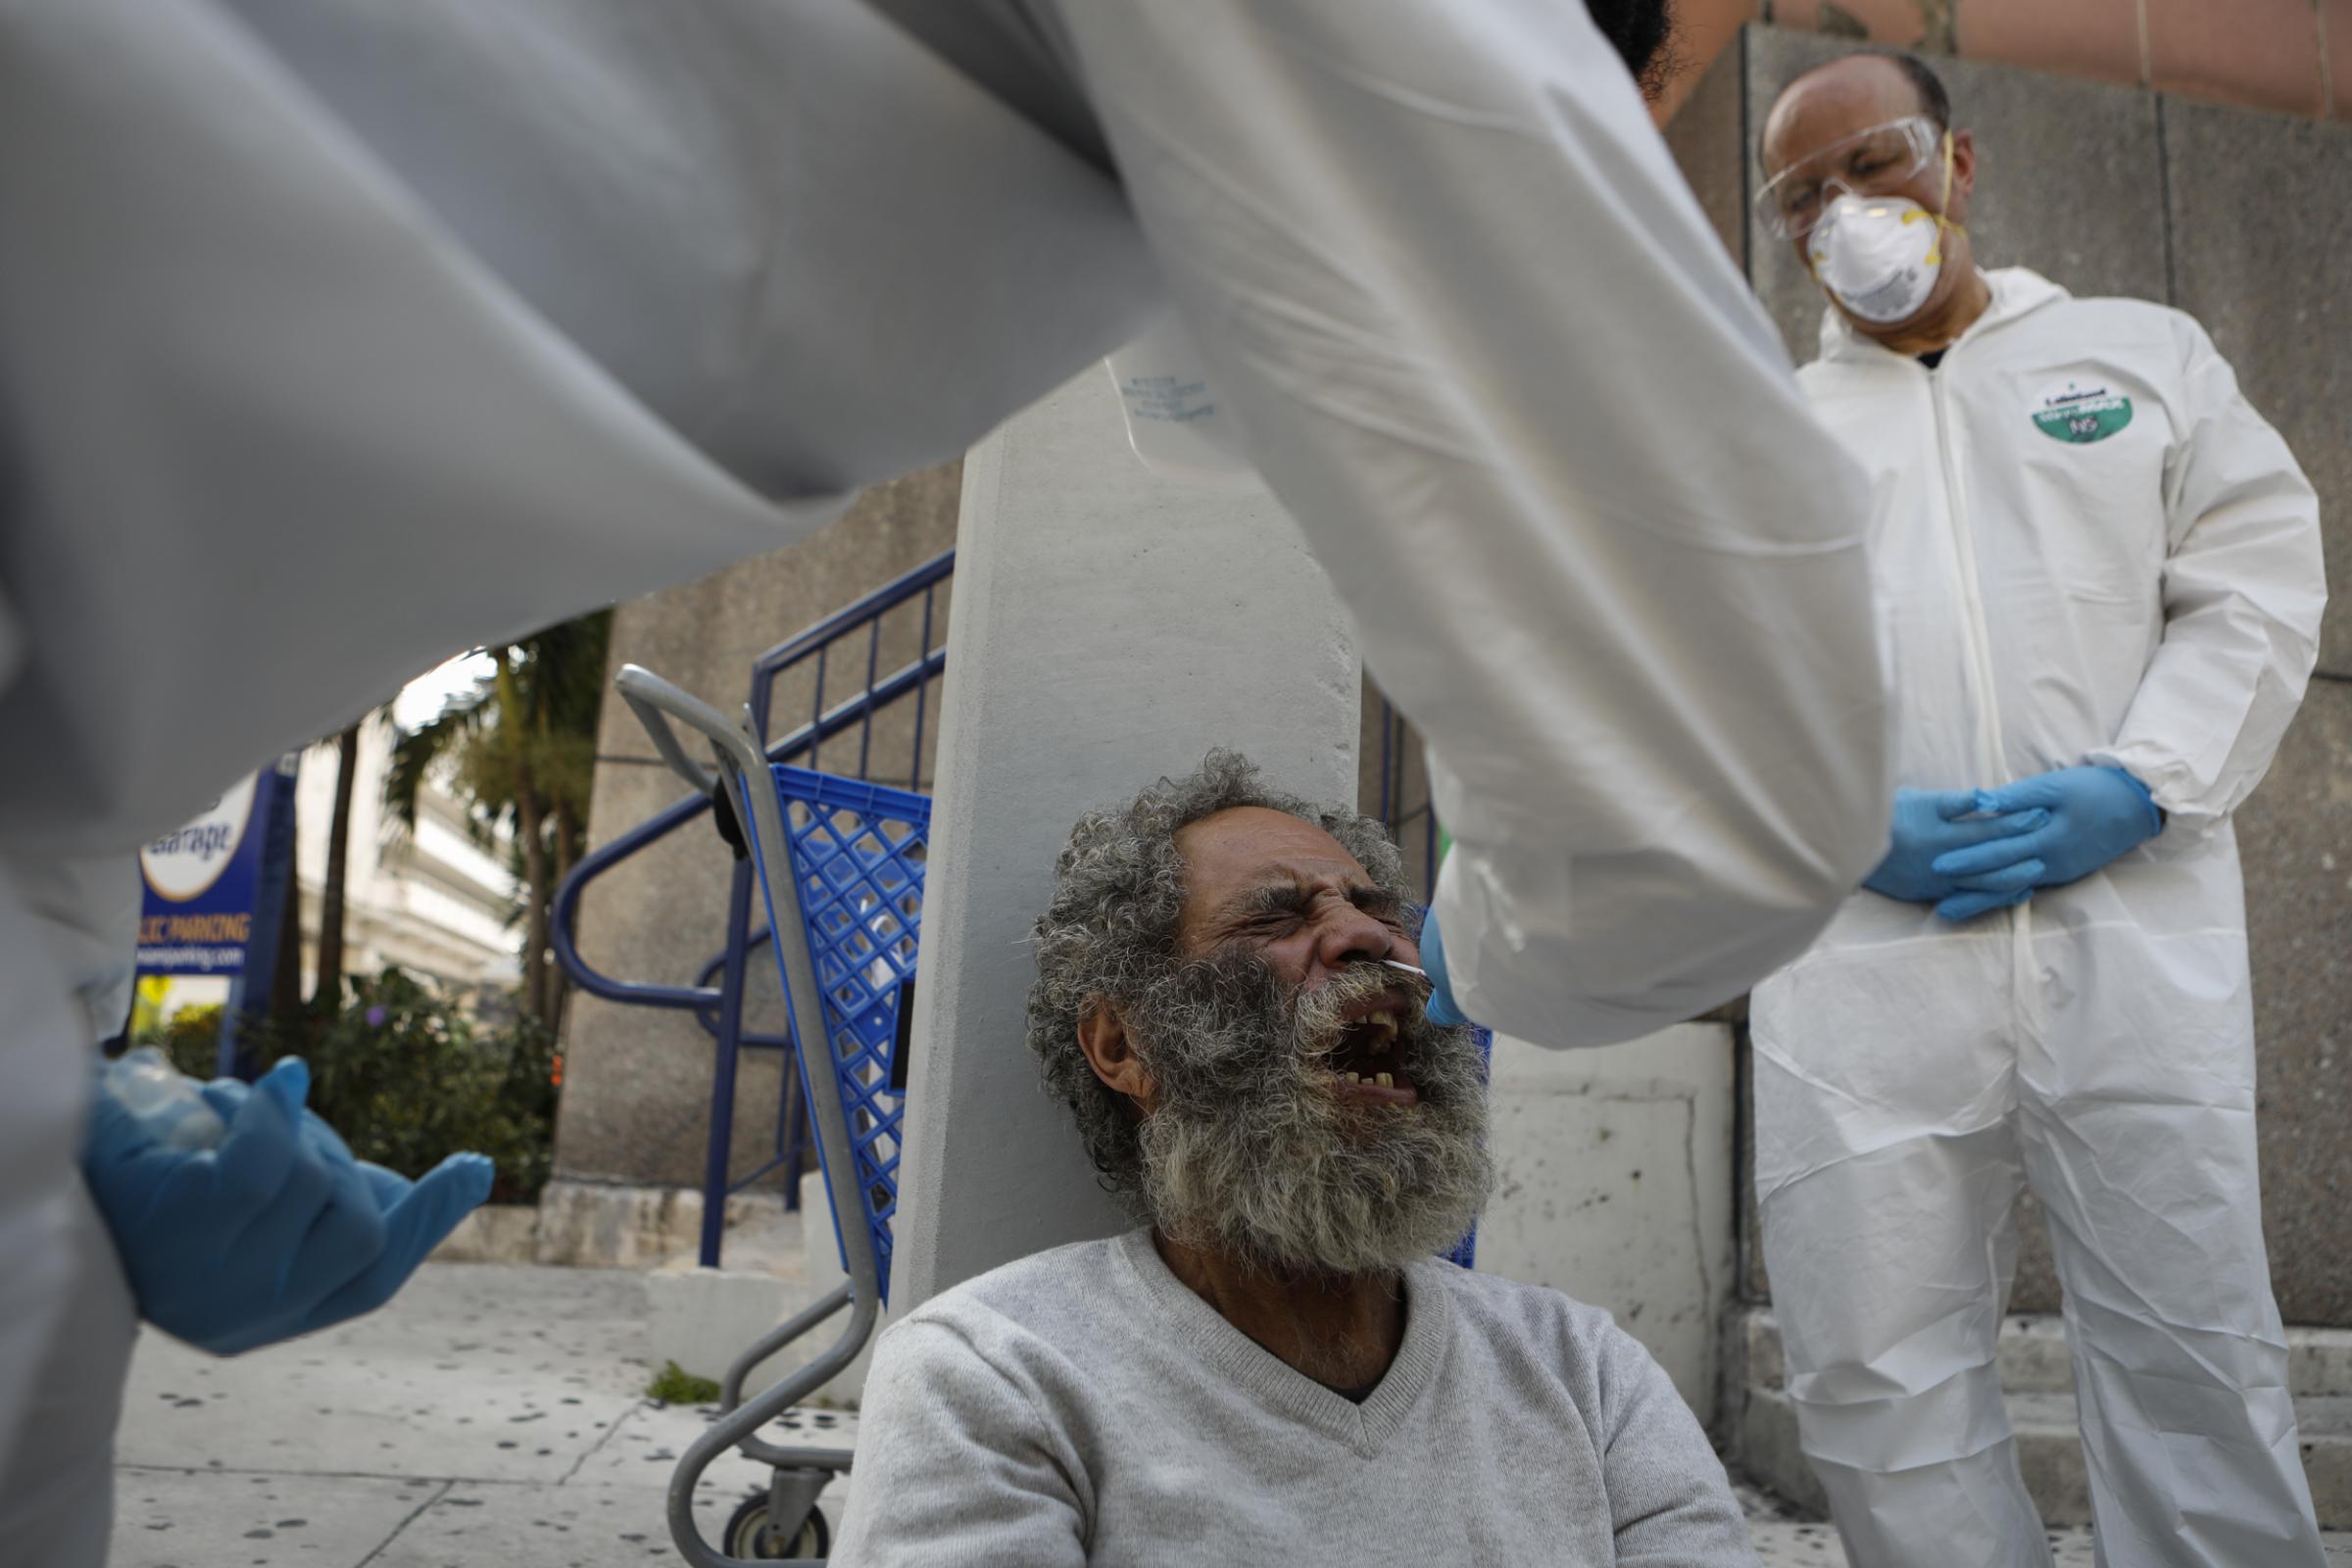 slideshow - A homeless man reacts as a worker uses a swap to collect a sample during a Miami-Dade County...